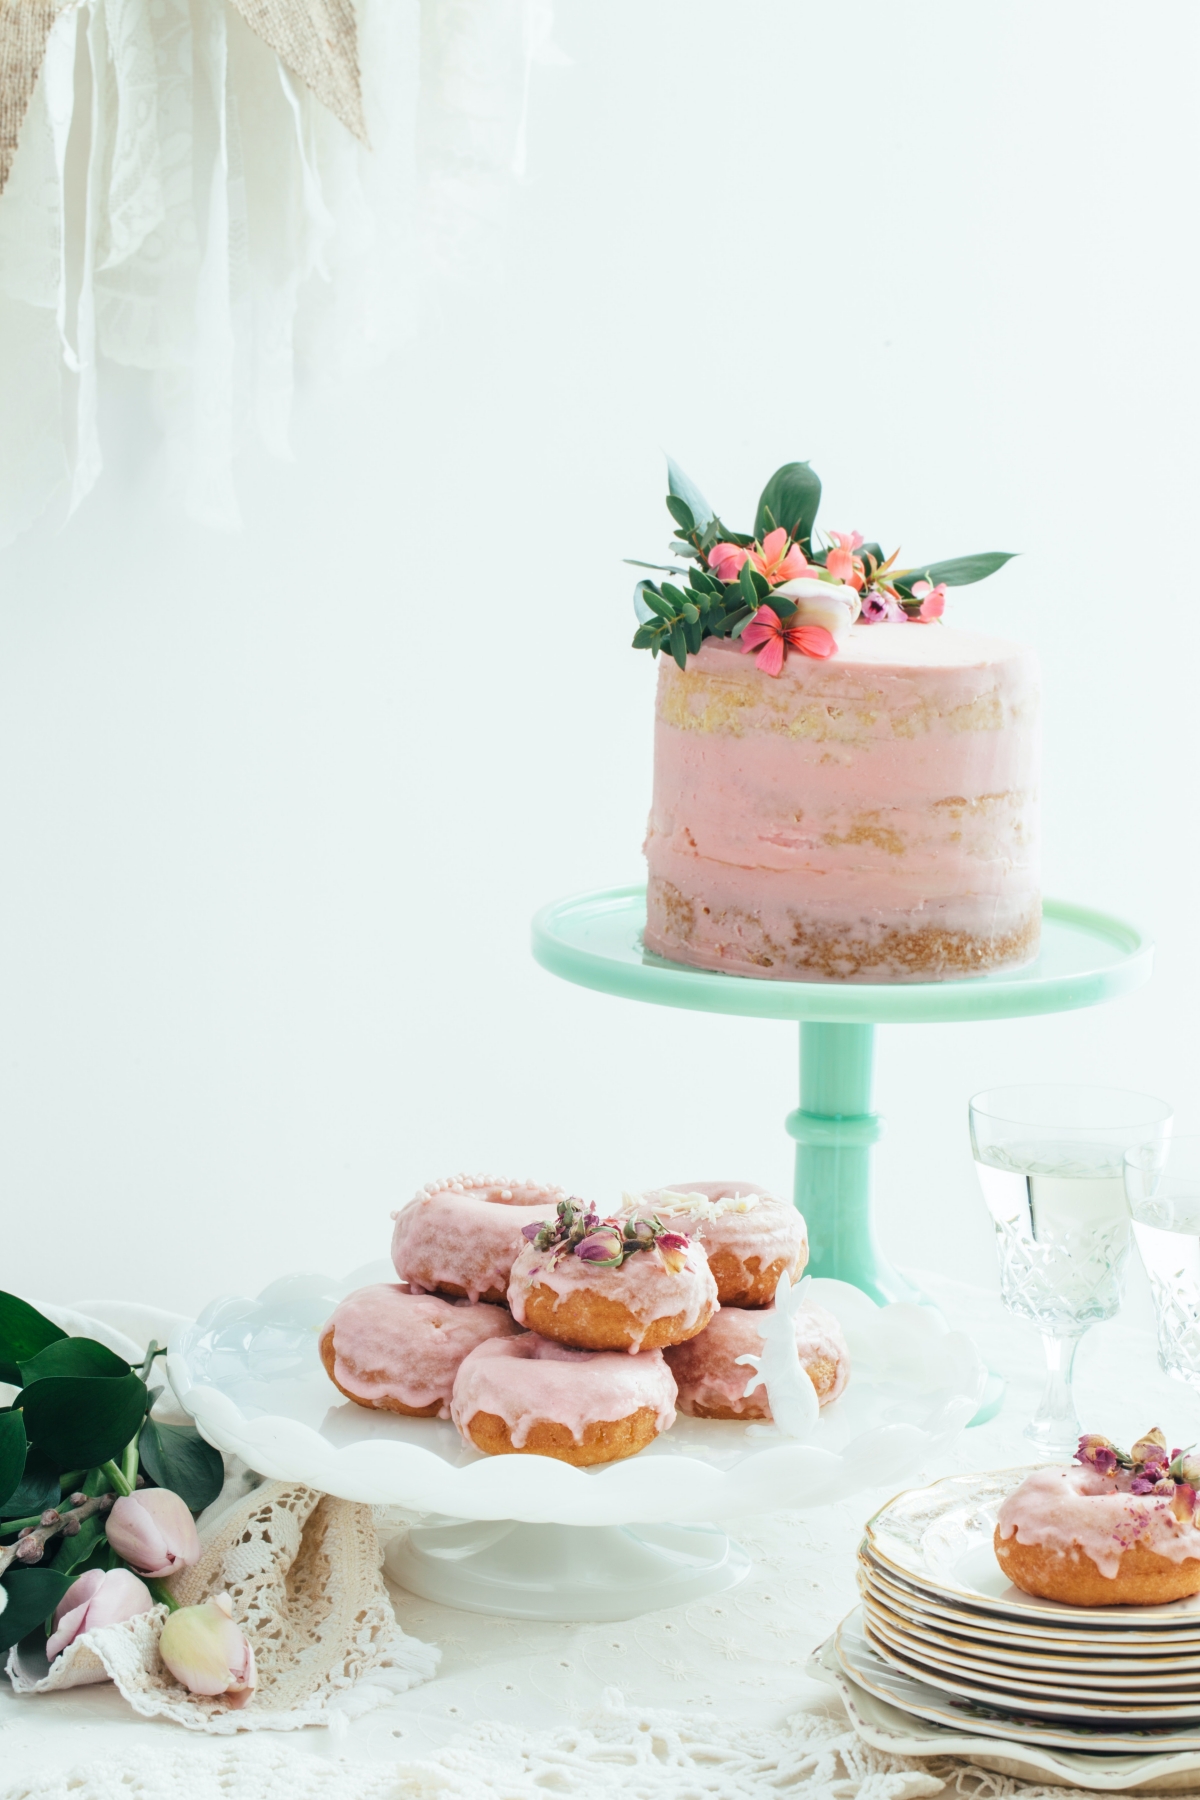 Winter Baby Shower Themes: 7 Most Creative & Magical Options